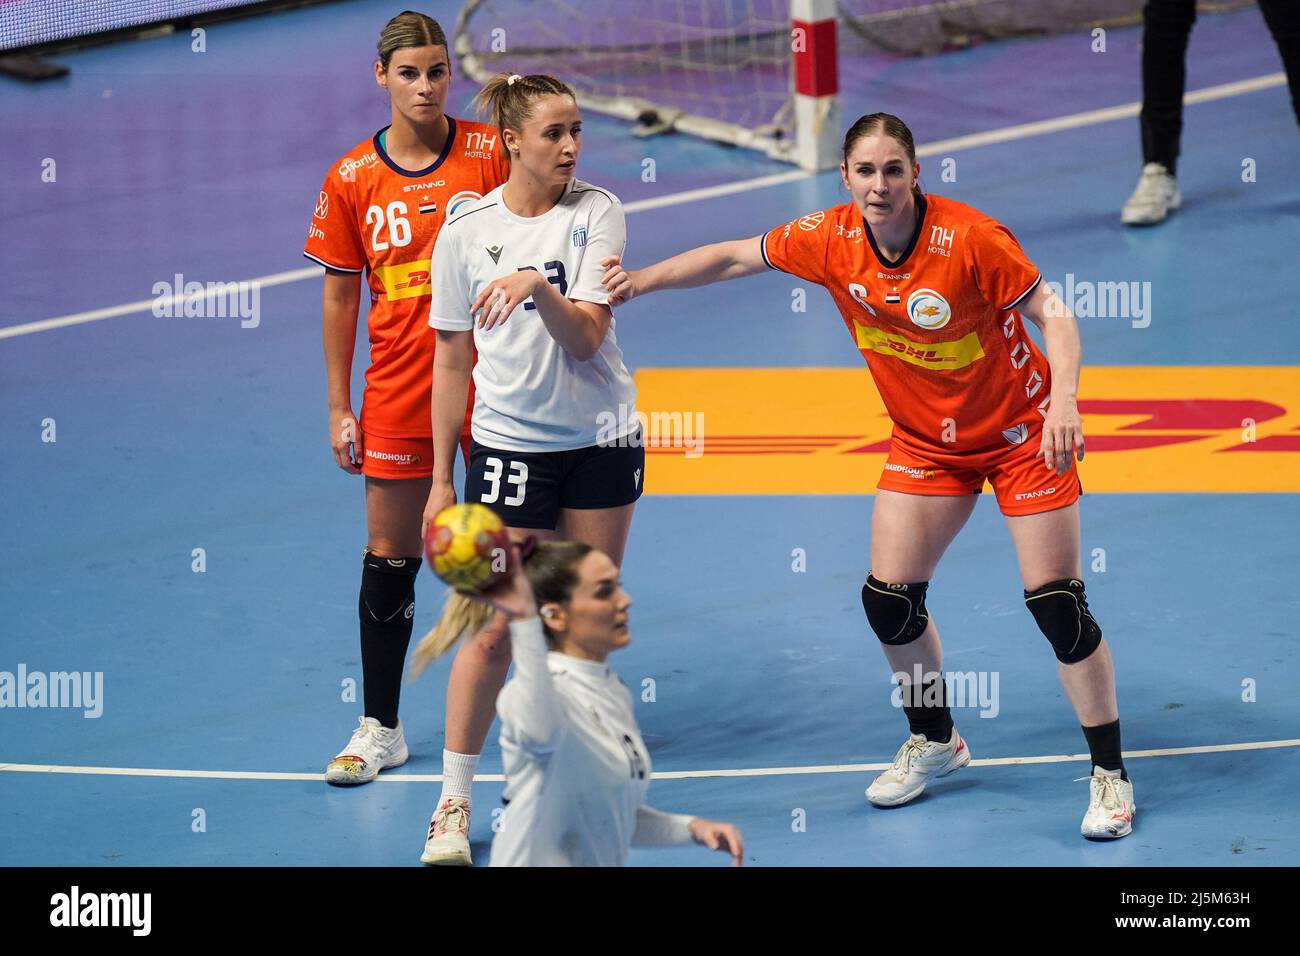 ALMERE, NETHERLANDS - APRIL 24: Angela Malestein of the Netherlands,  Panagiota Argyropoulou of Greece and Laura van der Heijden of the  Netherlands during the EHF EURO 2022 Qualifiers Phase 2 match between